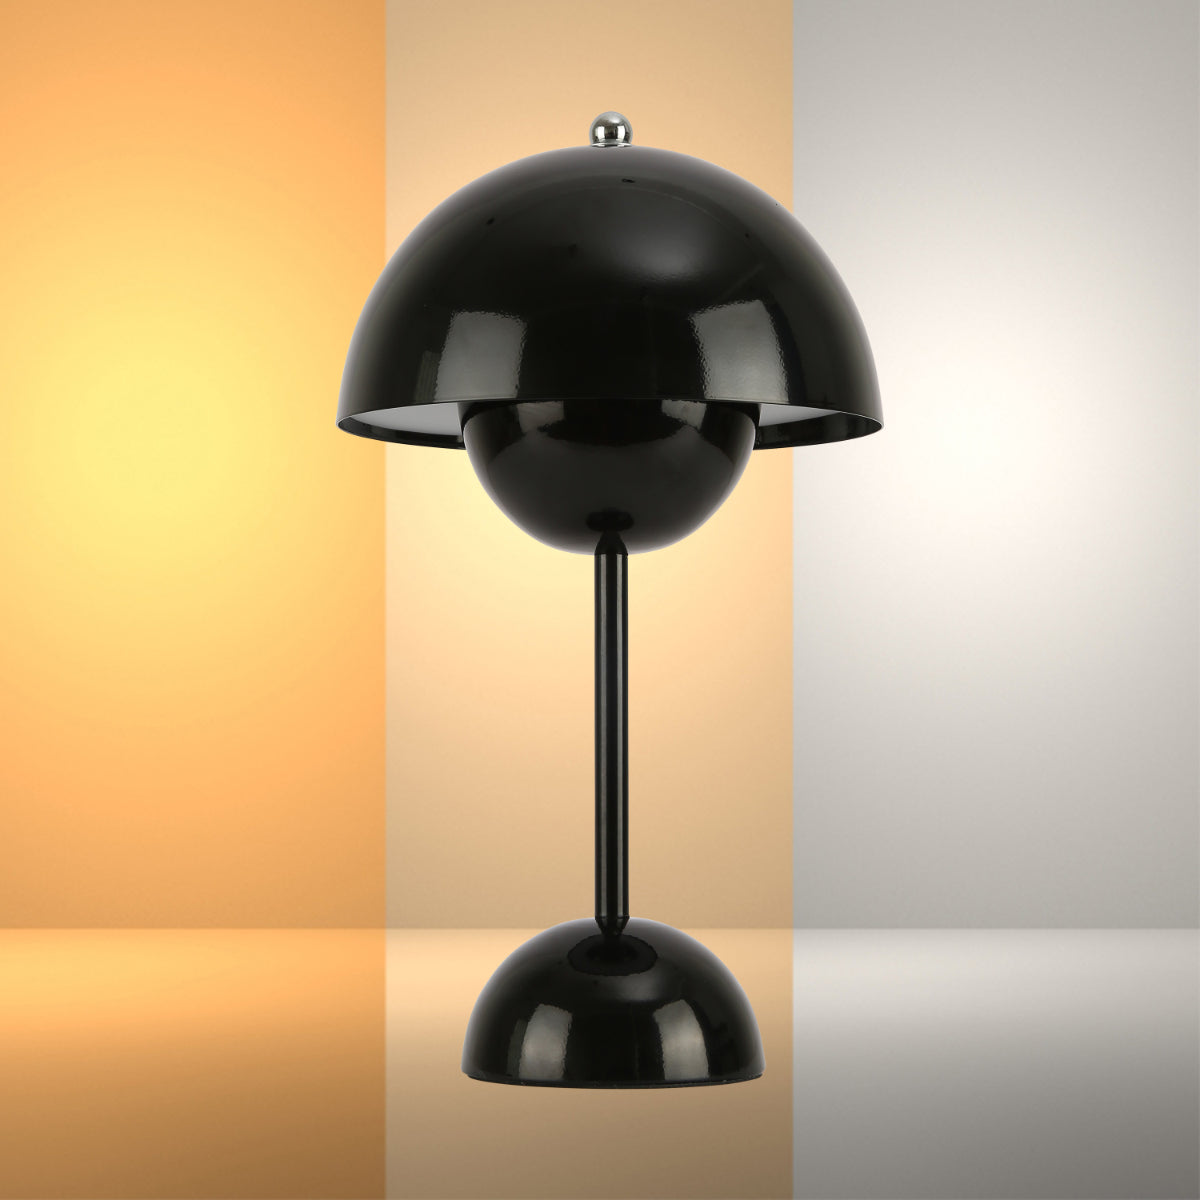 Main image of Spherical Harmony LED Table Lamp – Dual-Color Elegance 130-03732